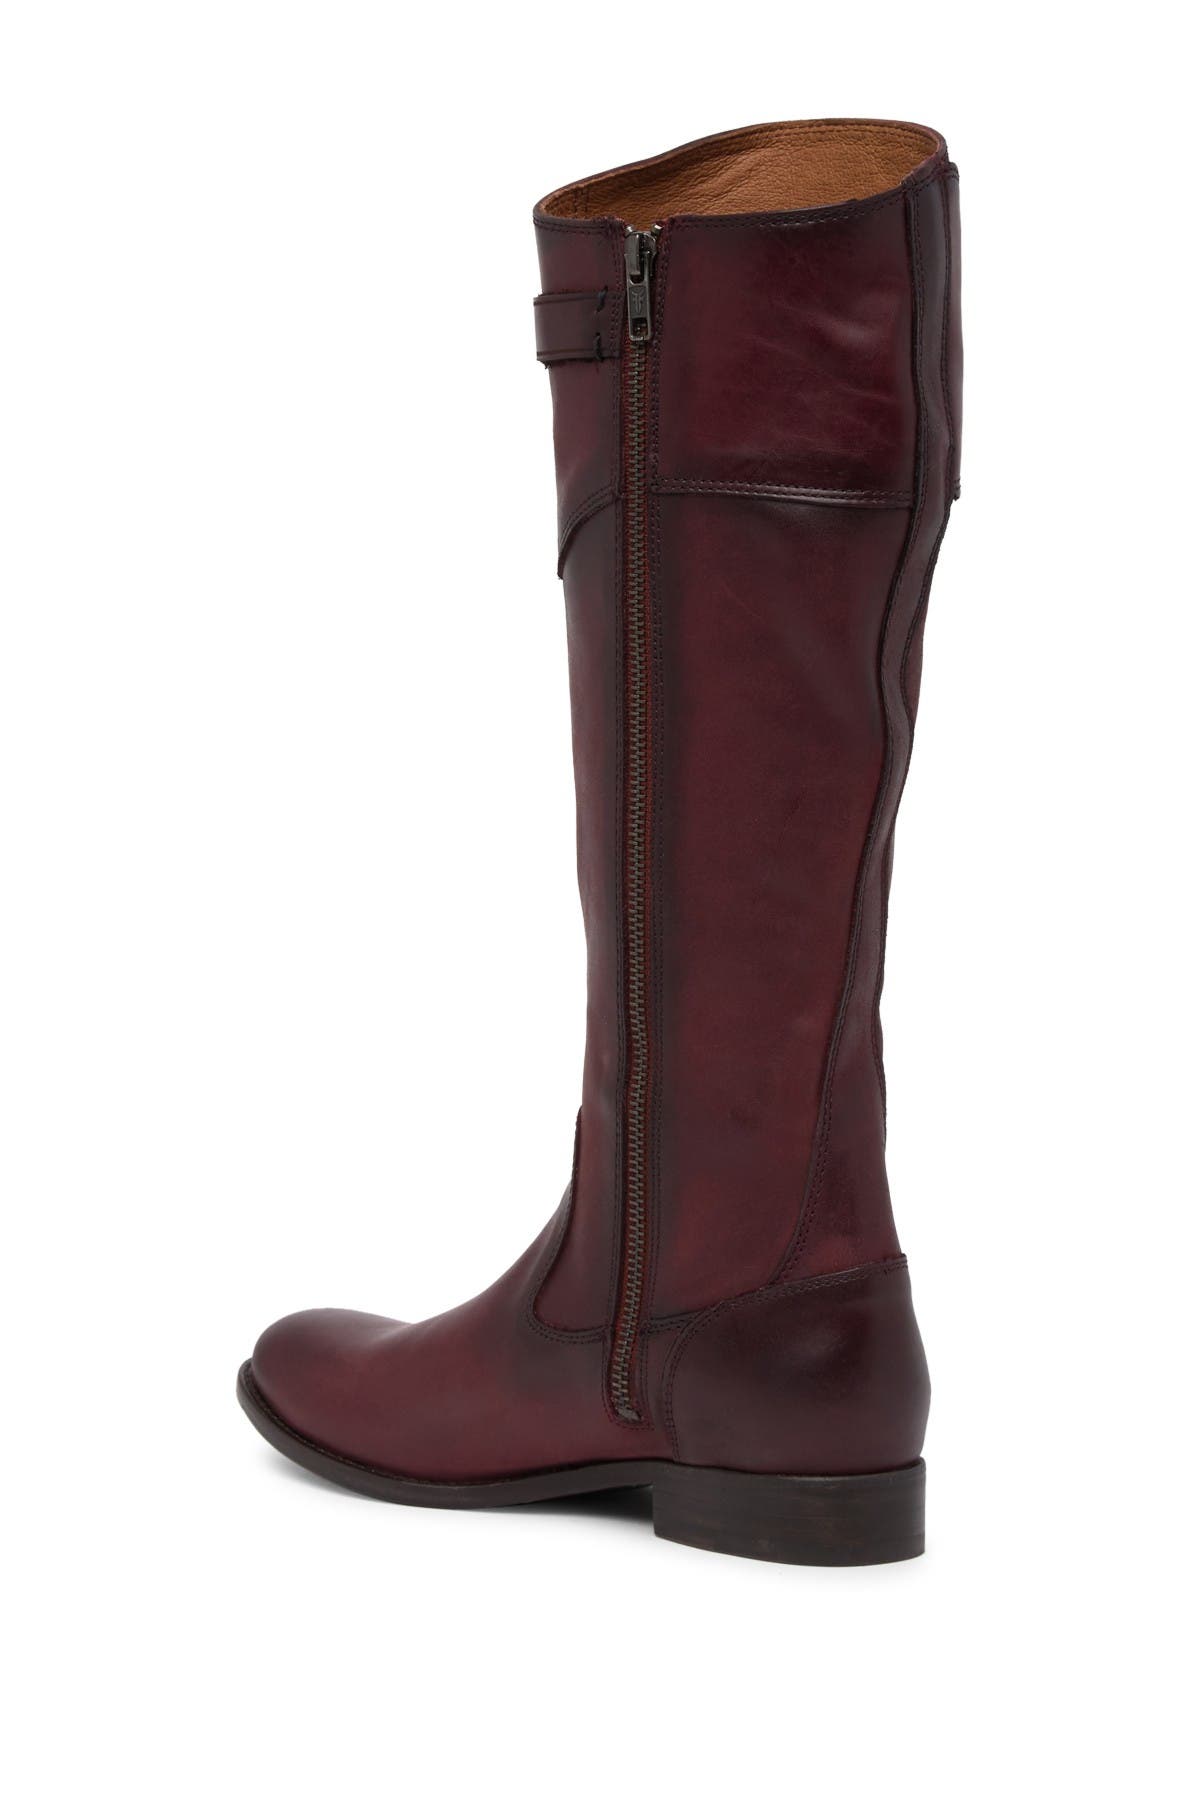 Frye | Molly Button Riding Boot 